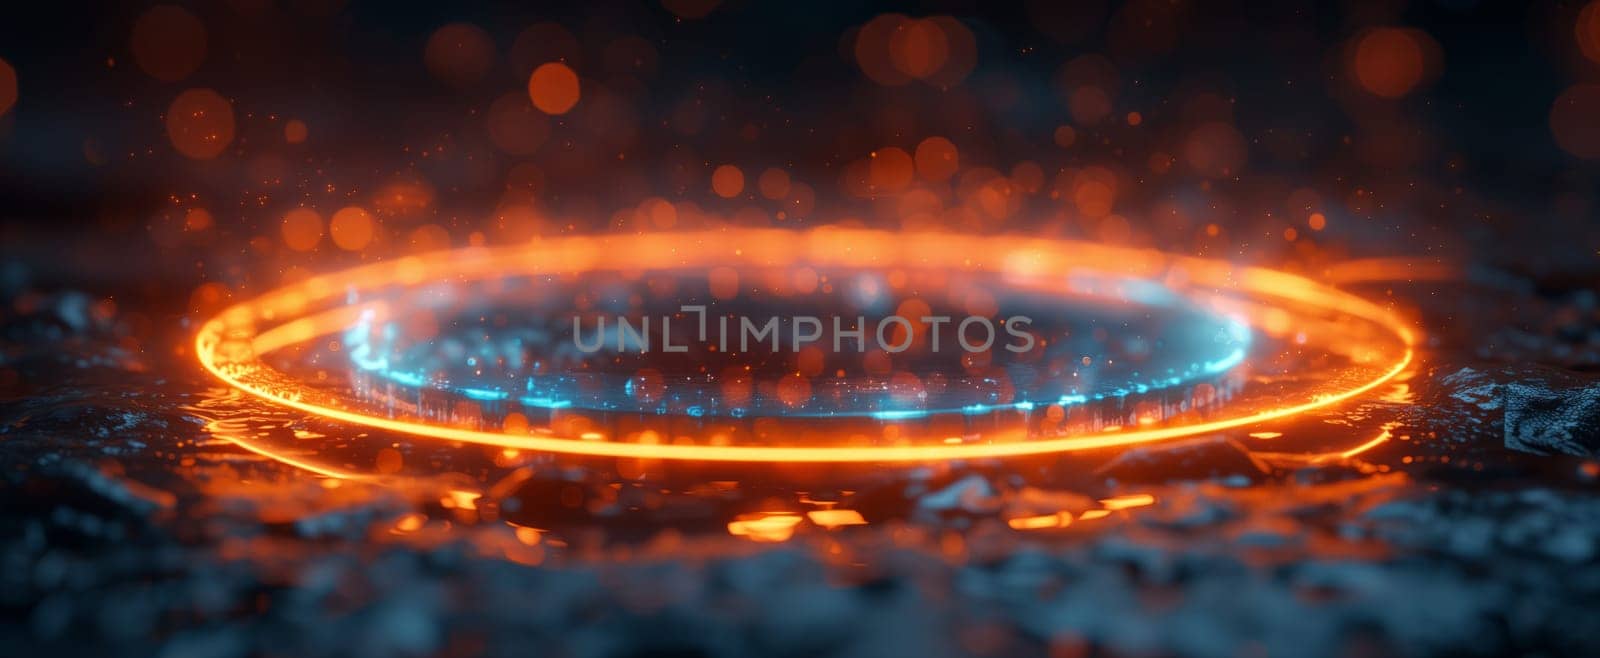 A ring of flame blazes at the center of the venue, creating a mesmerizing display of electric blue heat. The fiery circle adds an element of entertainment to the event space